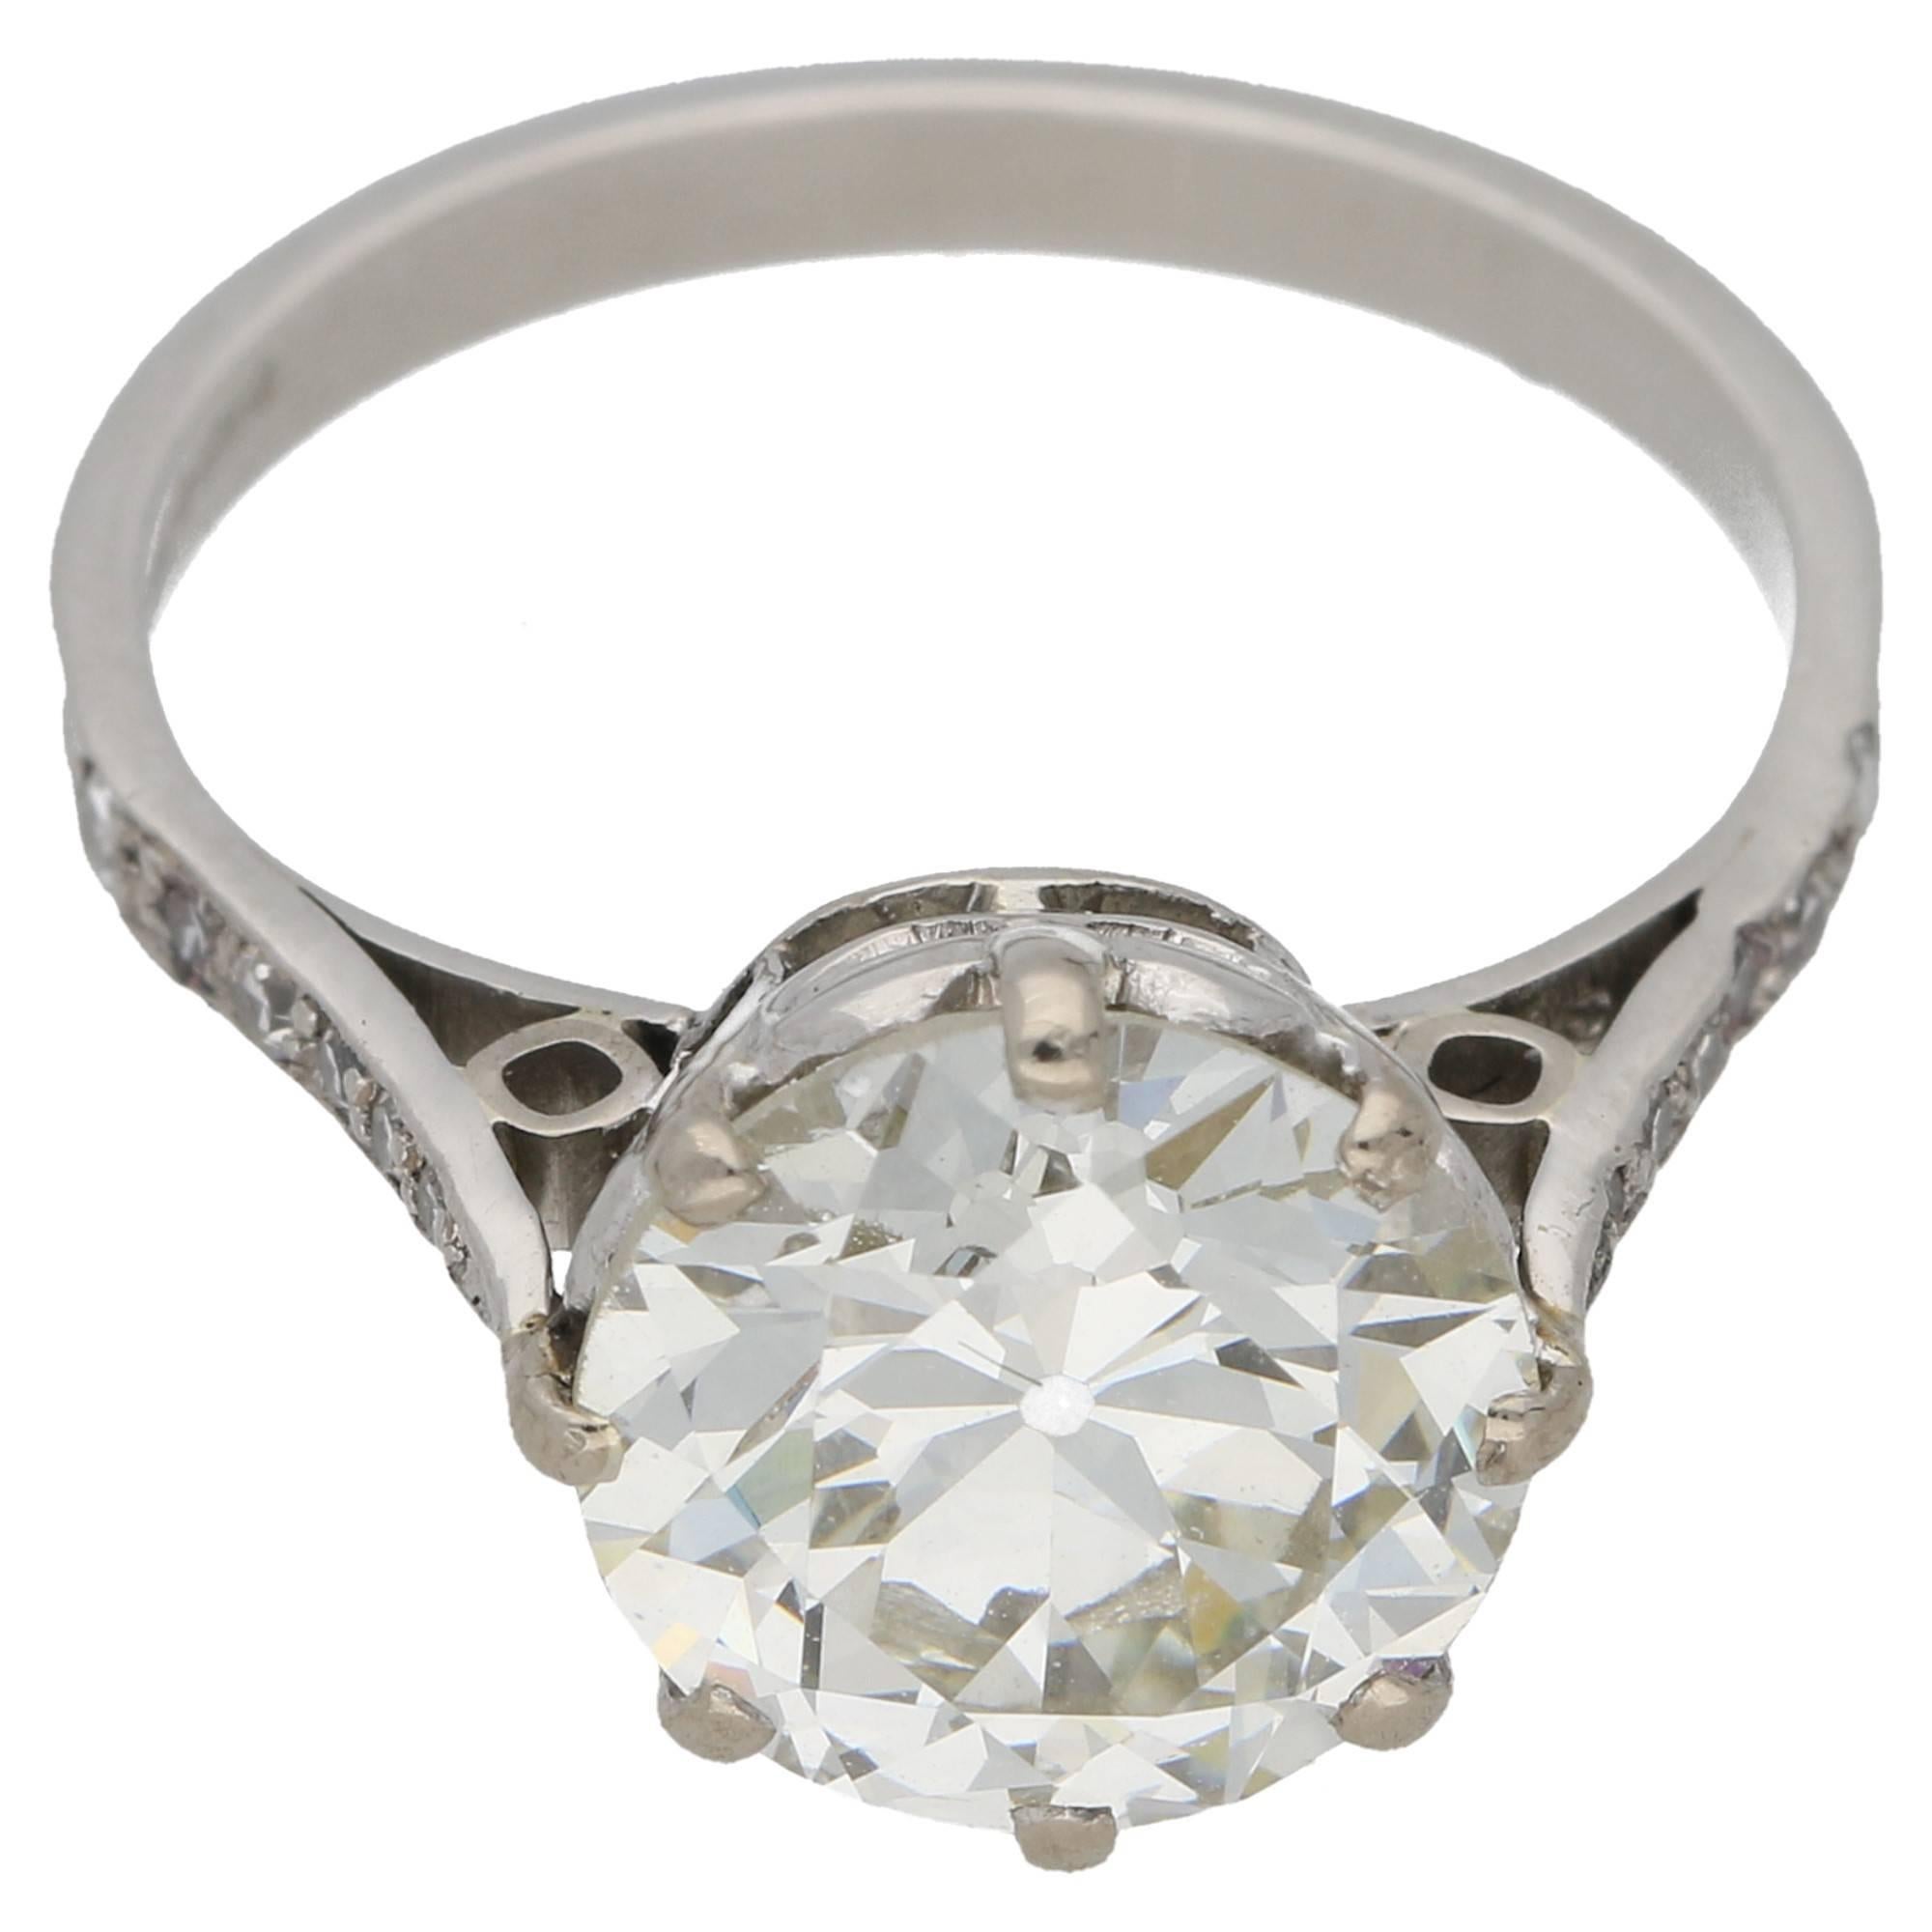 An Edwardian platinum single stone diamond ring, featuring a 2.78ct L colour and VS1 clarity Old European cut diamond, set in an eight claw setting with scroll detailing on the sides and open daylight shoulders each featuring six grain set diamonds.